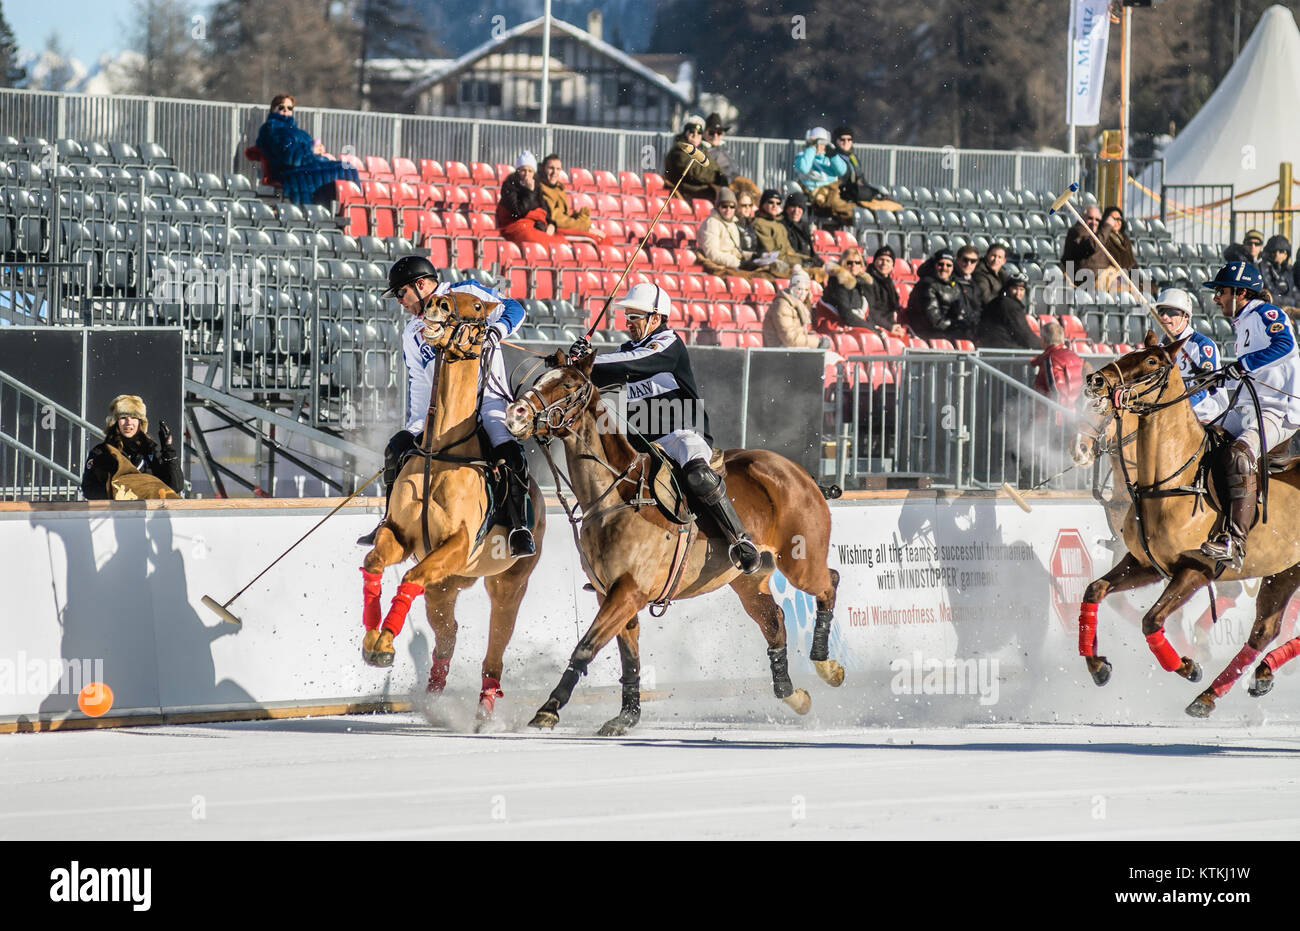 Scenes during the Snow Polo Game France-Germany during the Polo World Cup in St Moritz, Switzerland Stock Photo